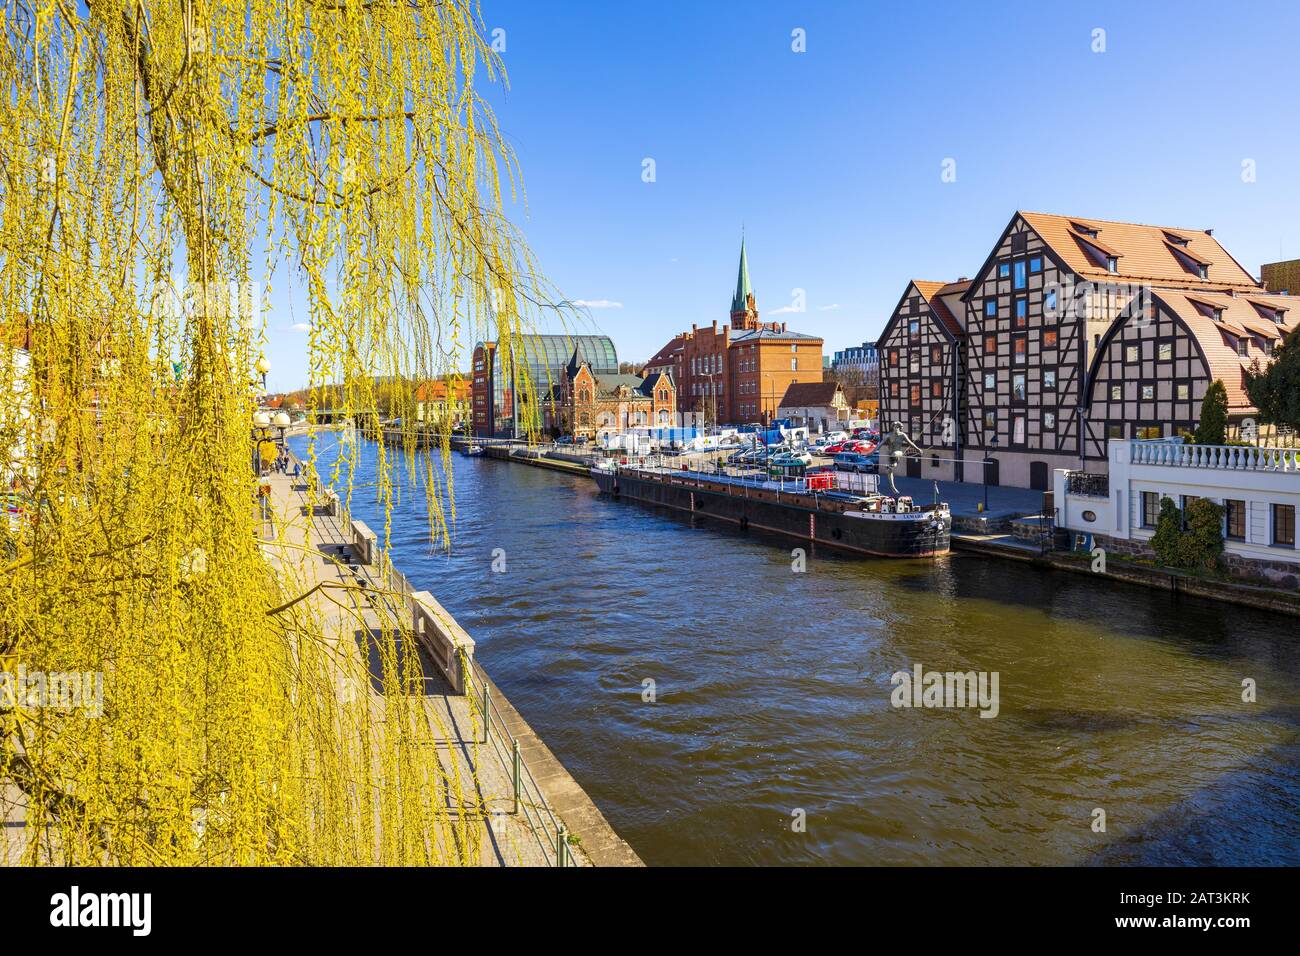 Bydgoszcz, Kujavian-Pomeranian / Poland - 2019/04/01: Panoramic view of the historic city center with the old town tenements along the Brda River embankment Stock Photo